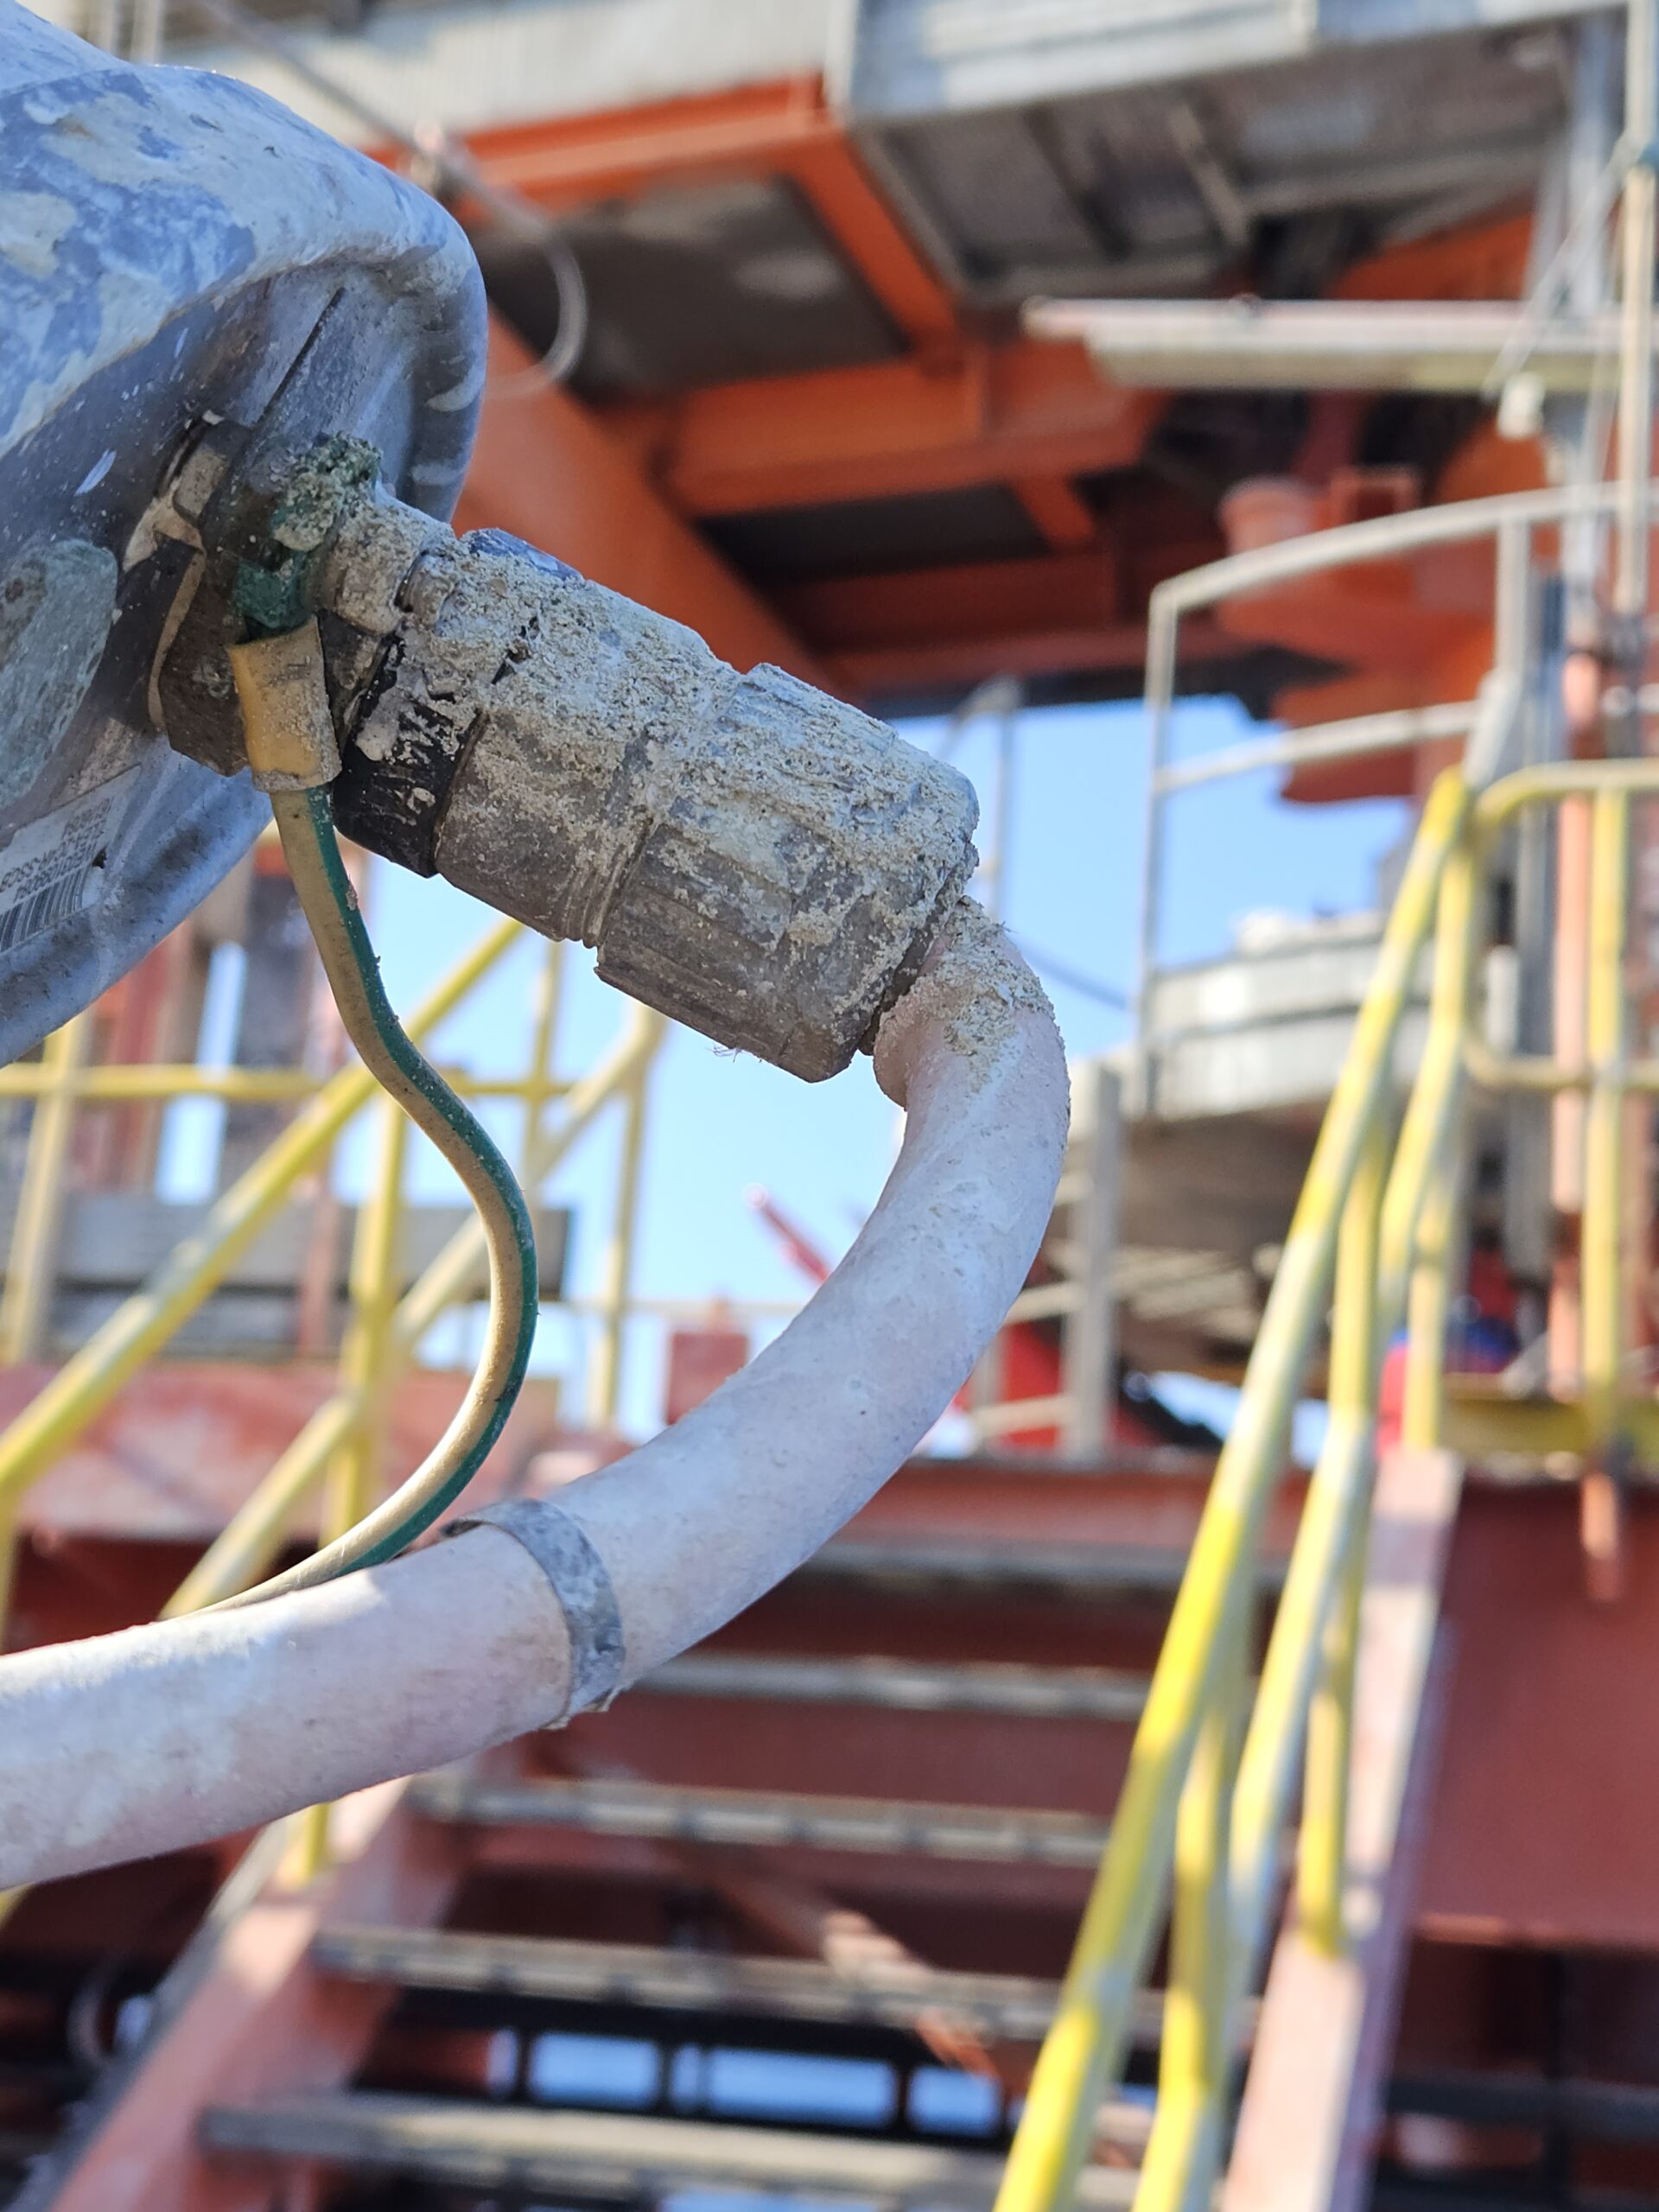 Cable Management on an offshore oil & gas platform